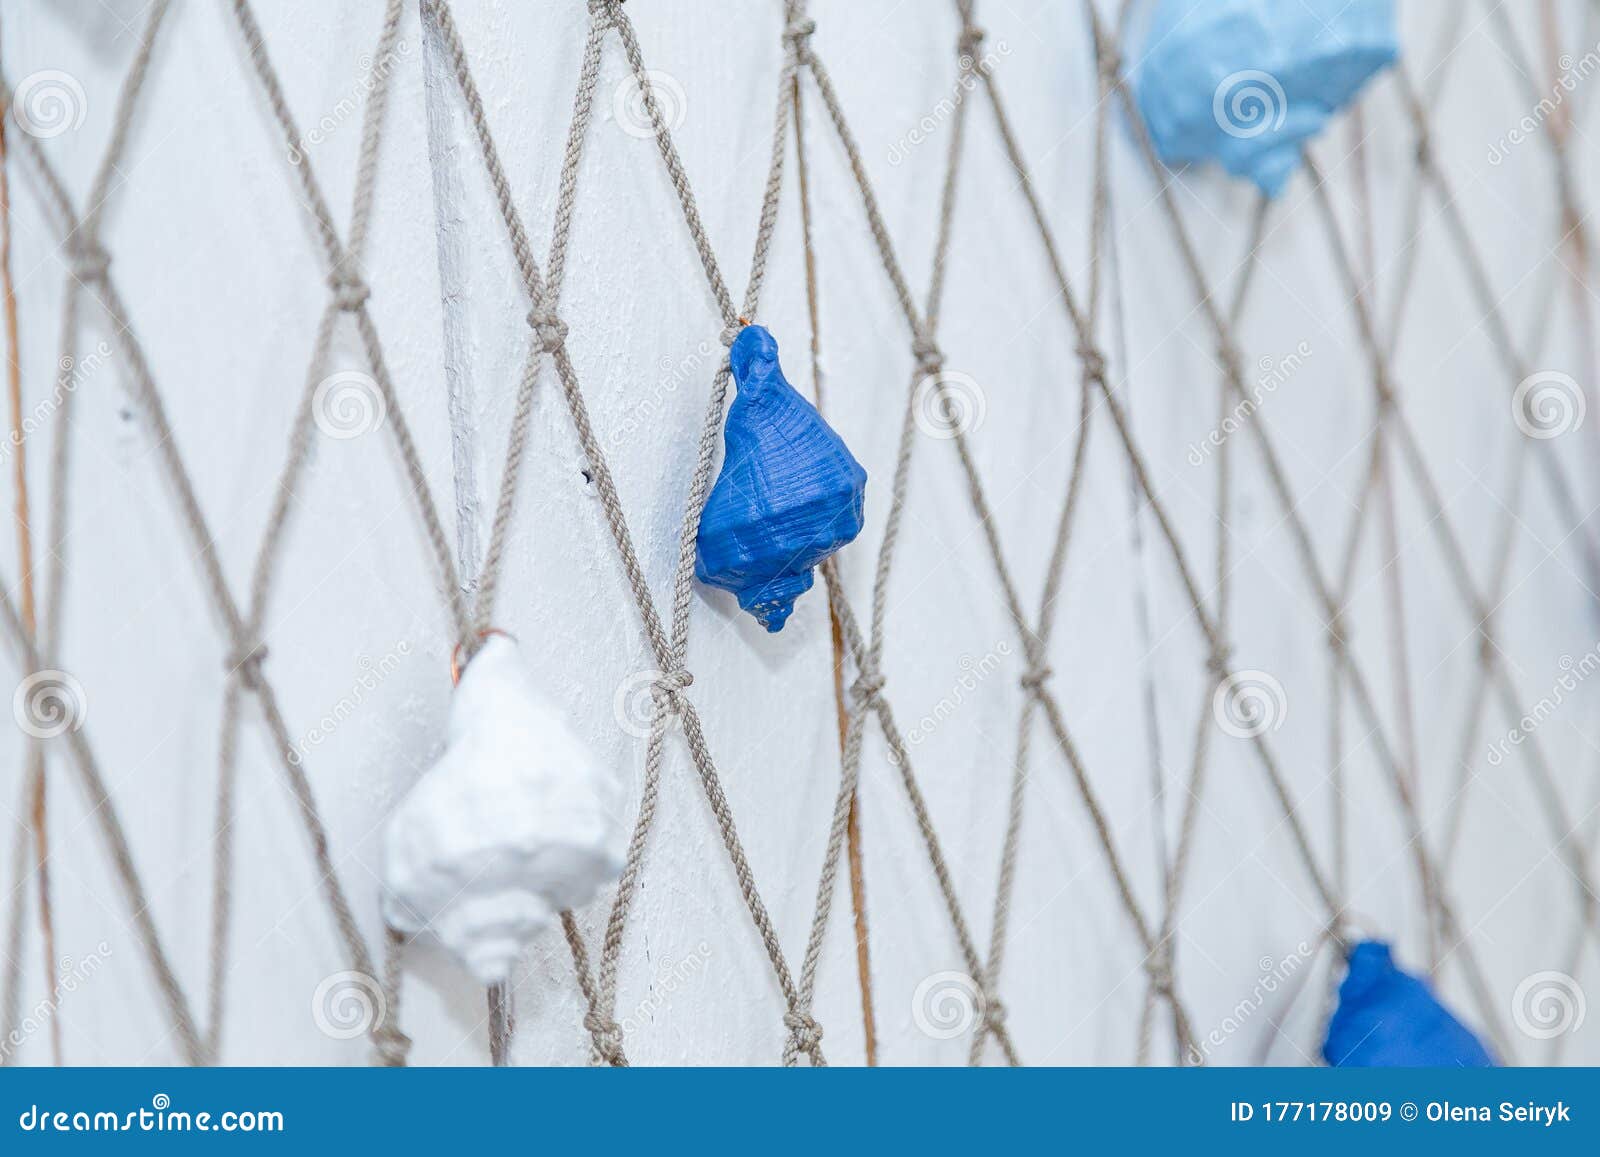 https://thumbs.dreamstime.com/z/thematic-sea-party-decorations-blue-white-painted-shells-hanging-fish-net-boy-birthday-child-177178009.jpg